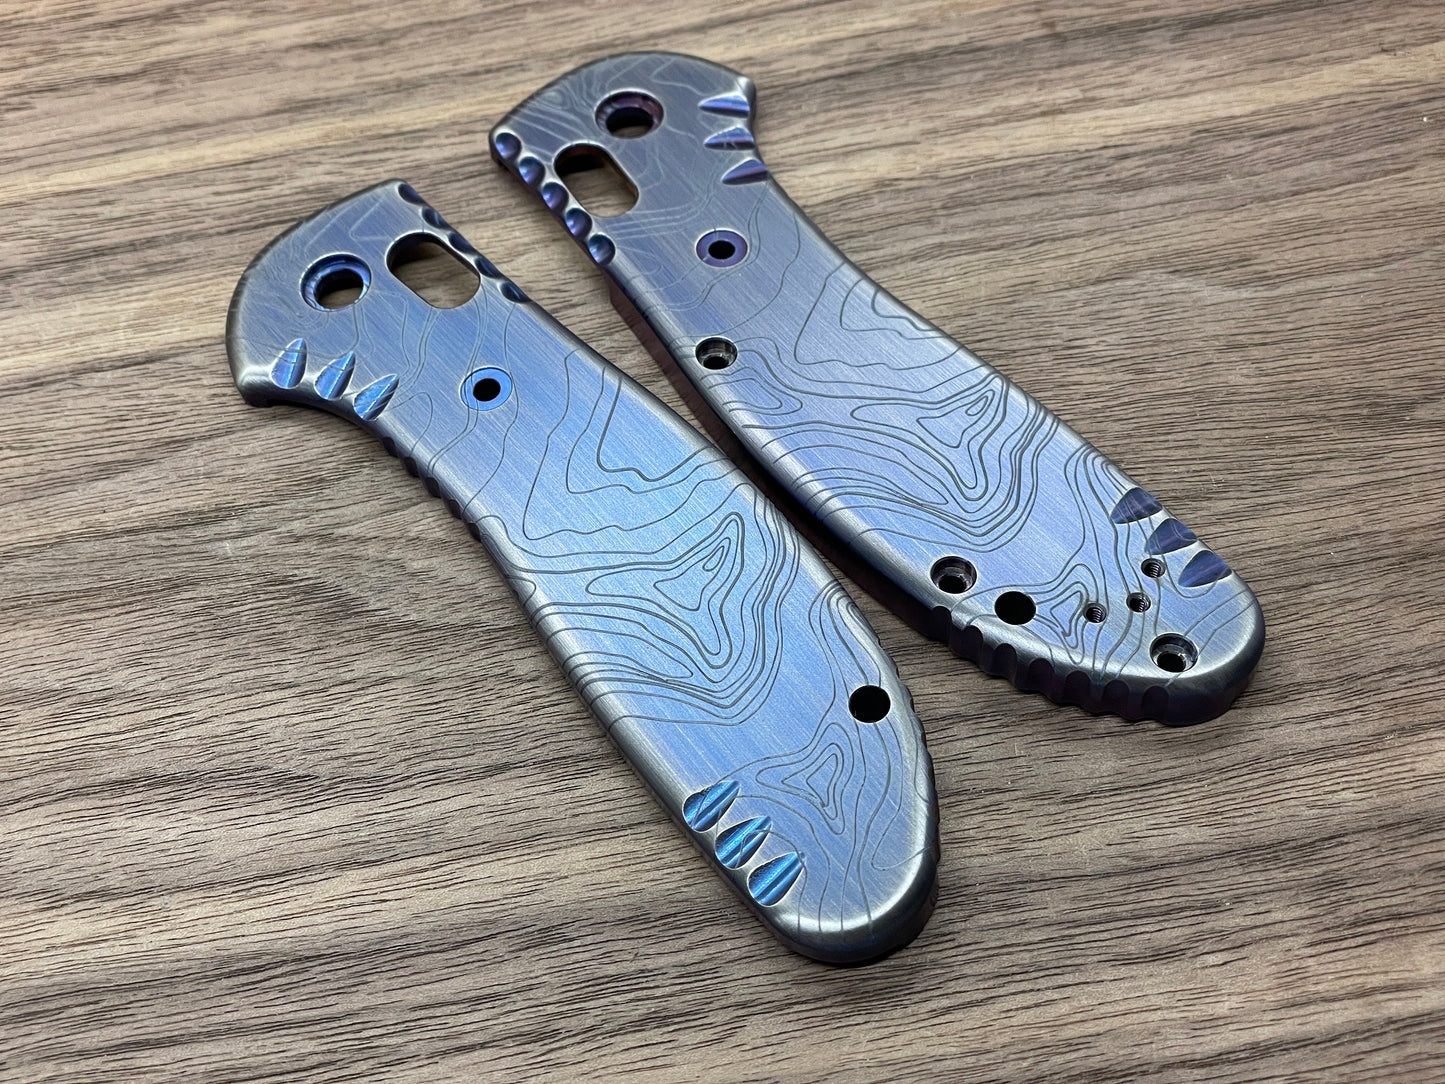 TOPO Blue Ano Brushed Titanium Scales for Benchmade GRIPTILIAN 551 & 550